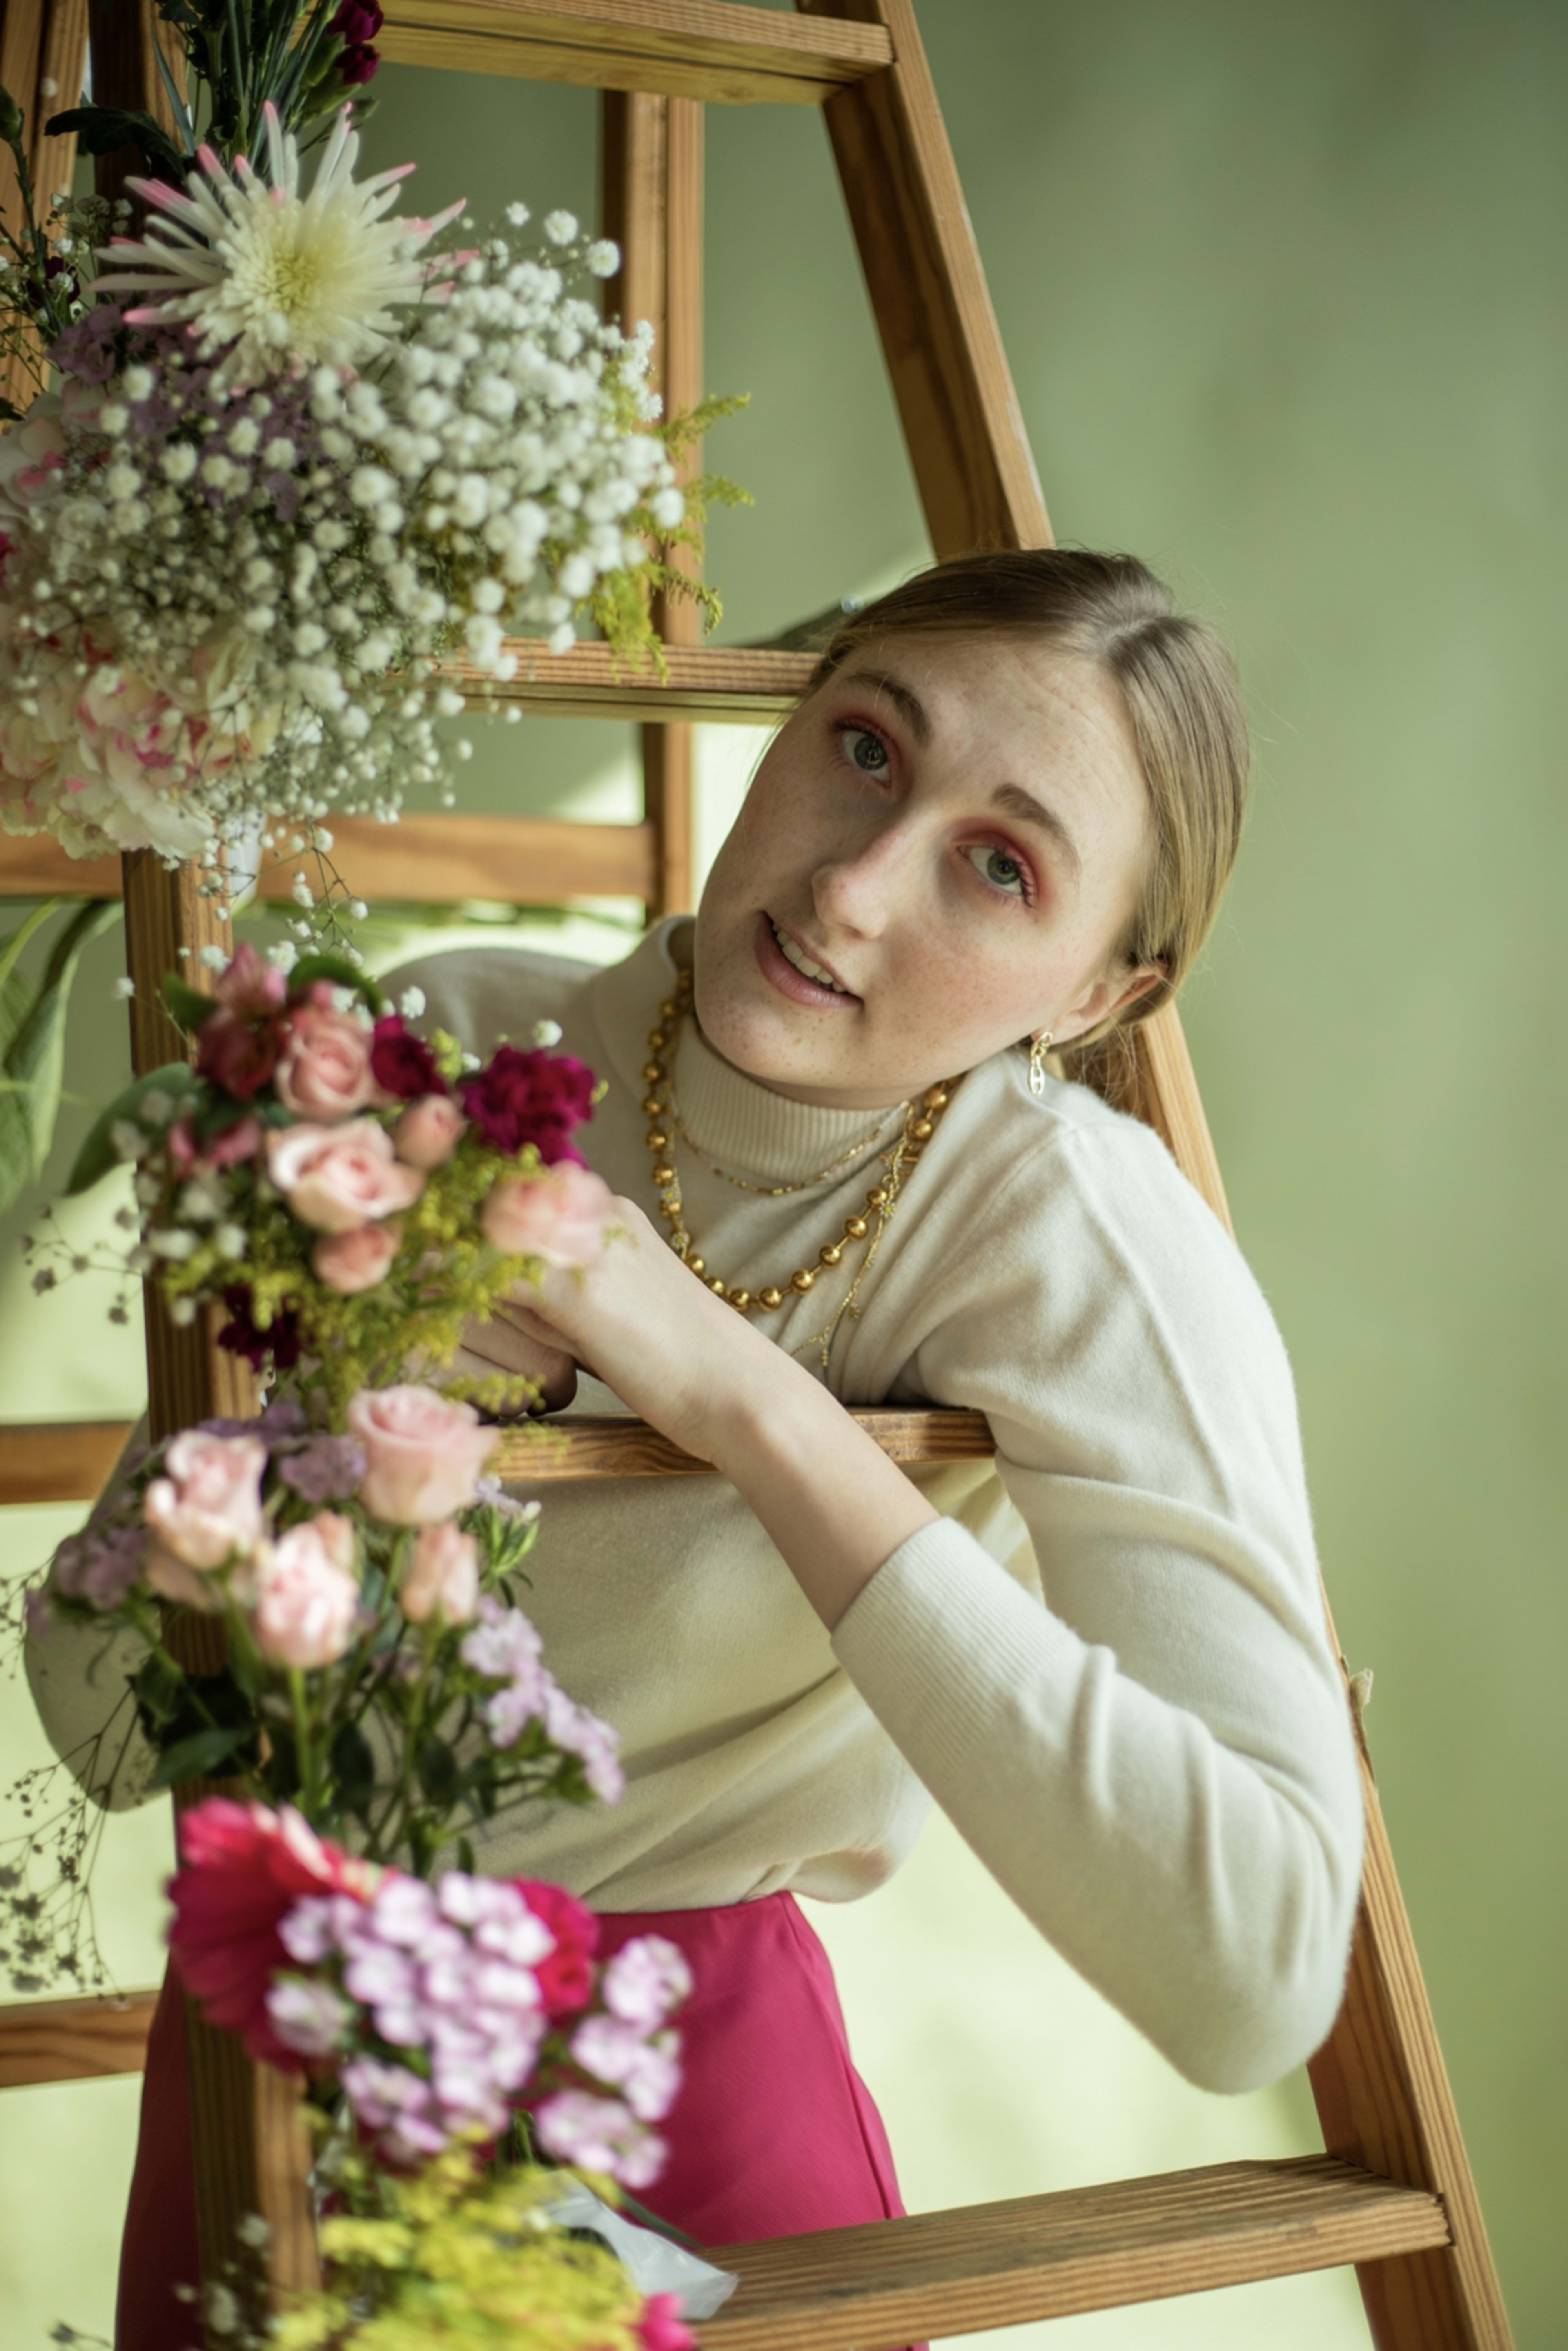 A woman leaning on a ladder holding a bunch of flowers.